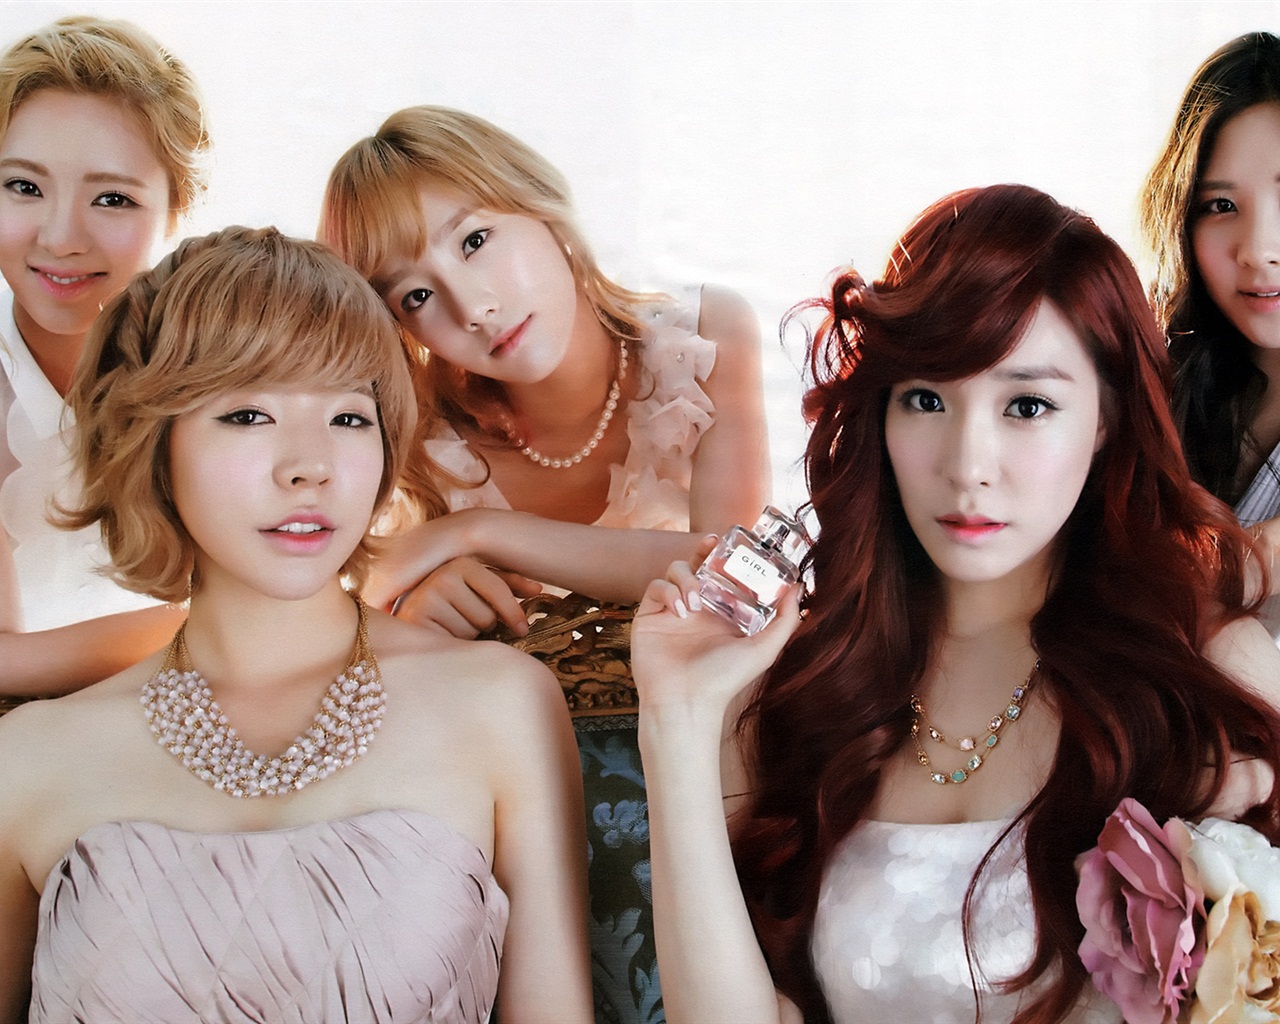 Girls Generation latest HD wallpapers collection #4 - 1280x1024